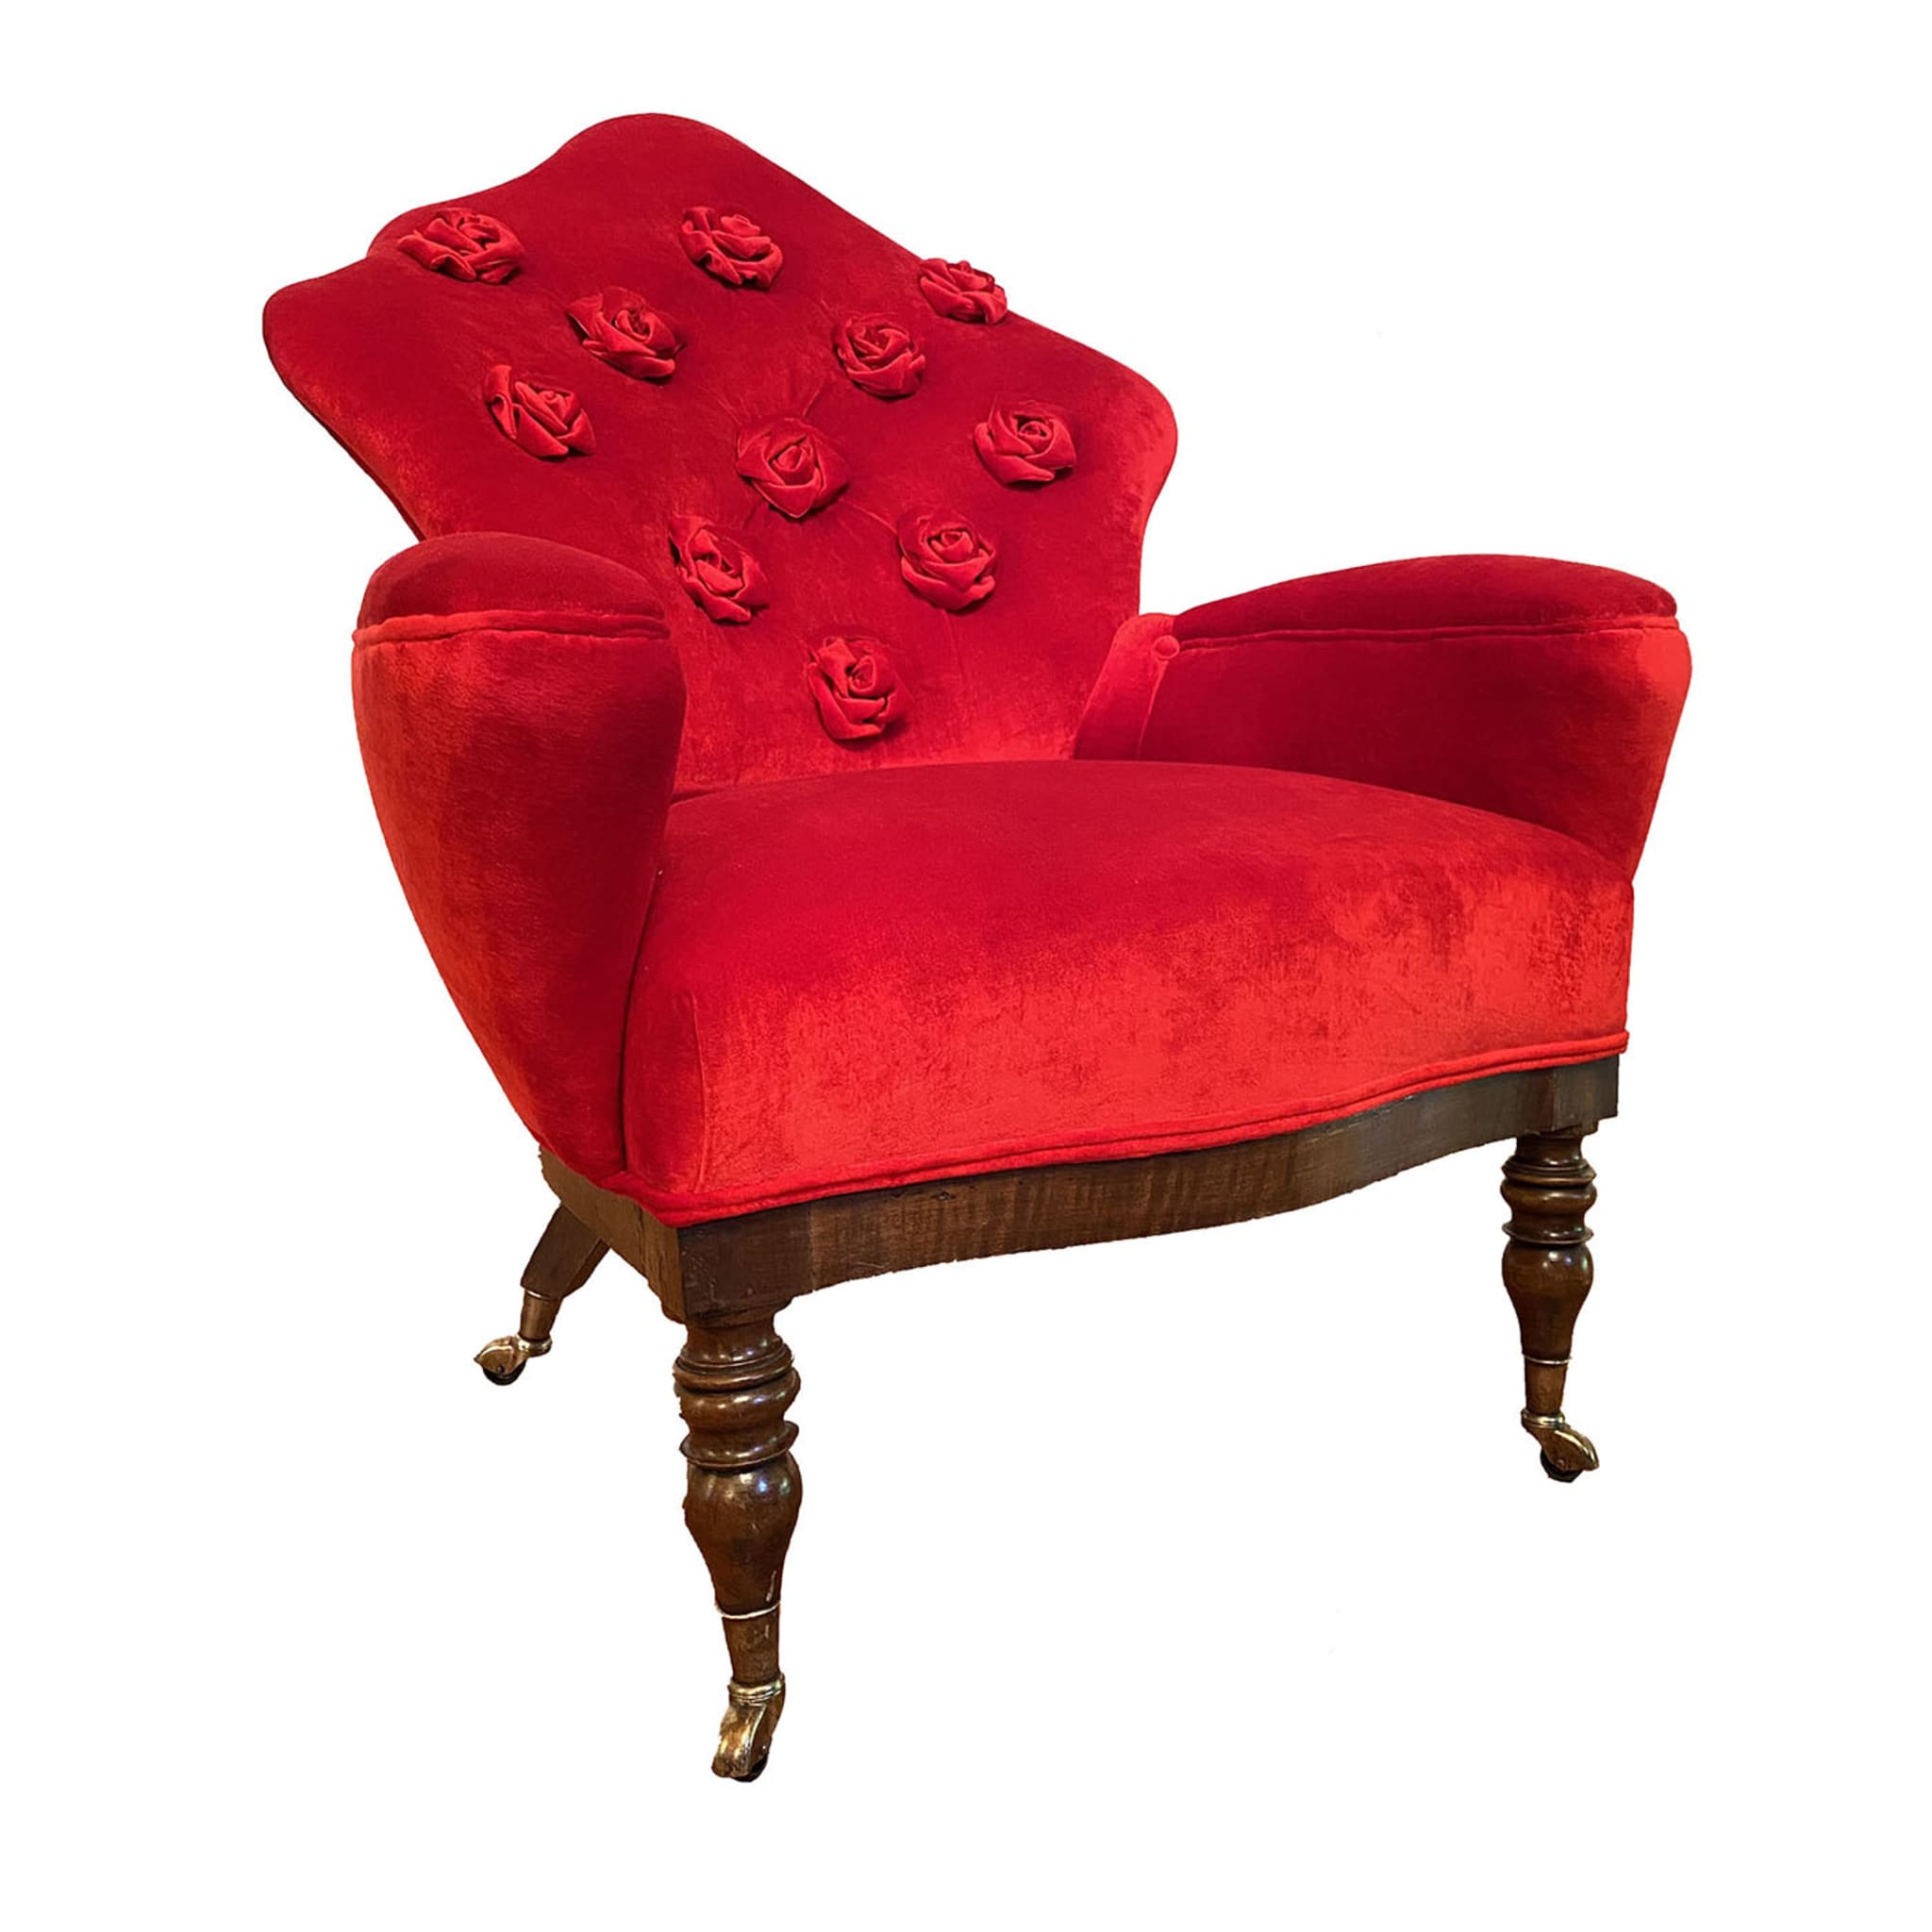 Le Rose Wheeled Red Armchair - Main view